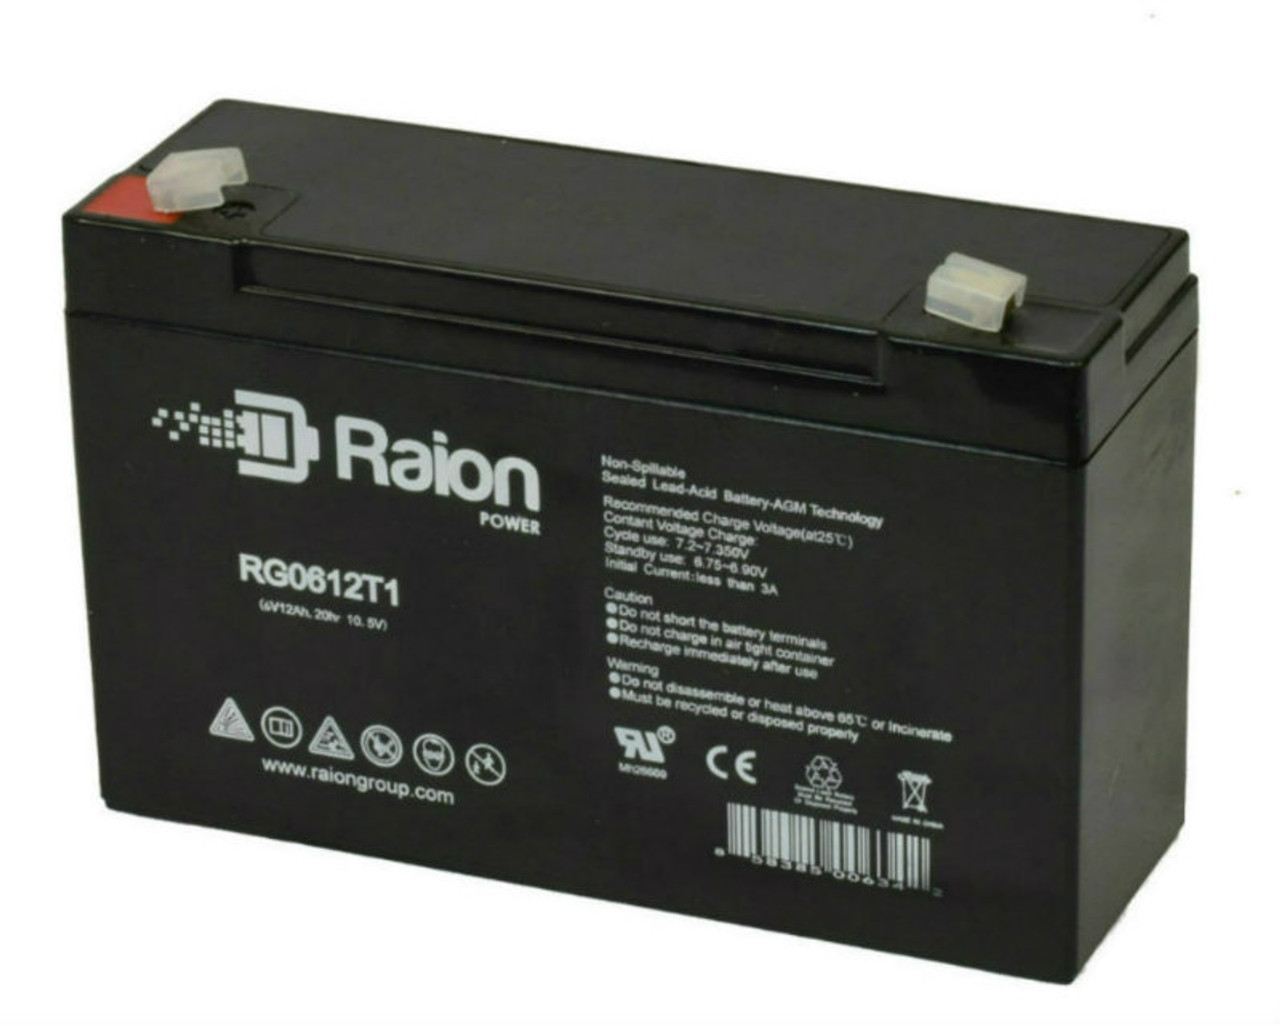 Raion Power RG06120T1 Replacement 6V 12Ah Emergency Light Battery for Siltron PE6V8